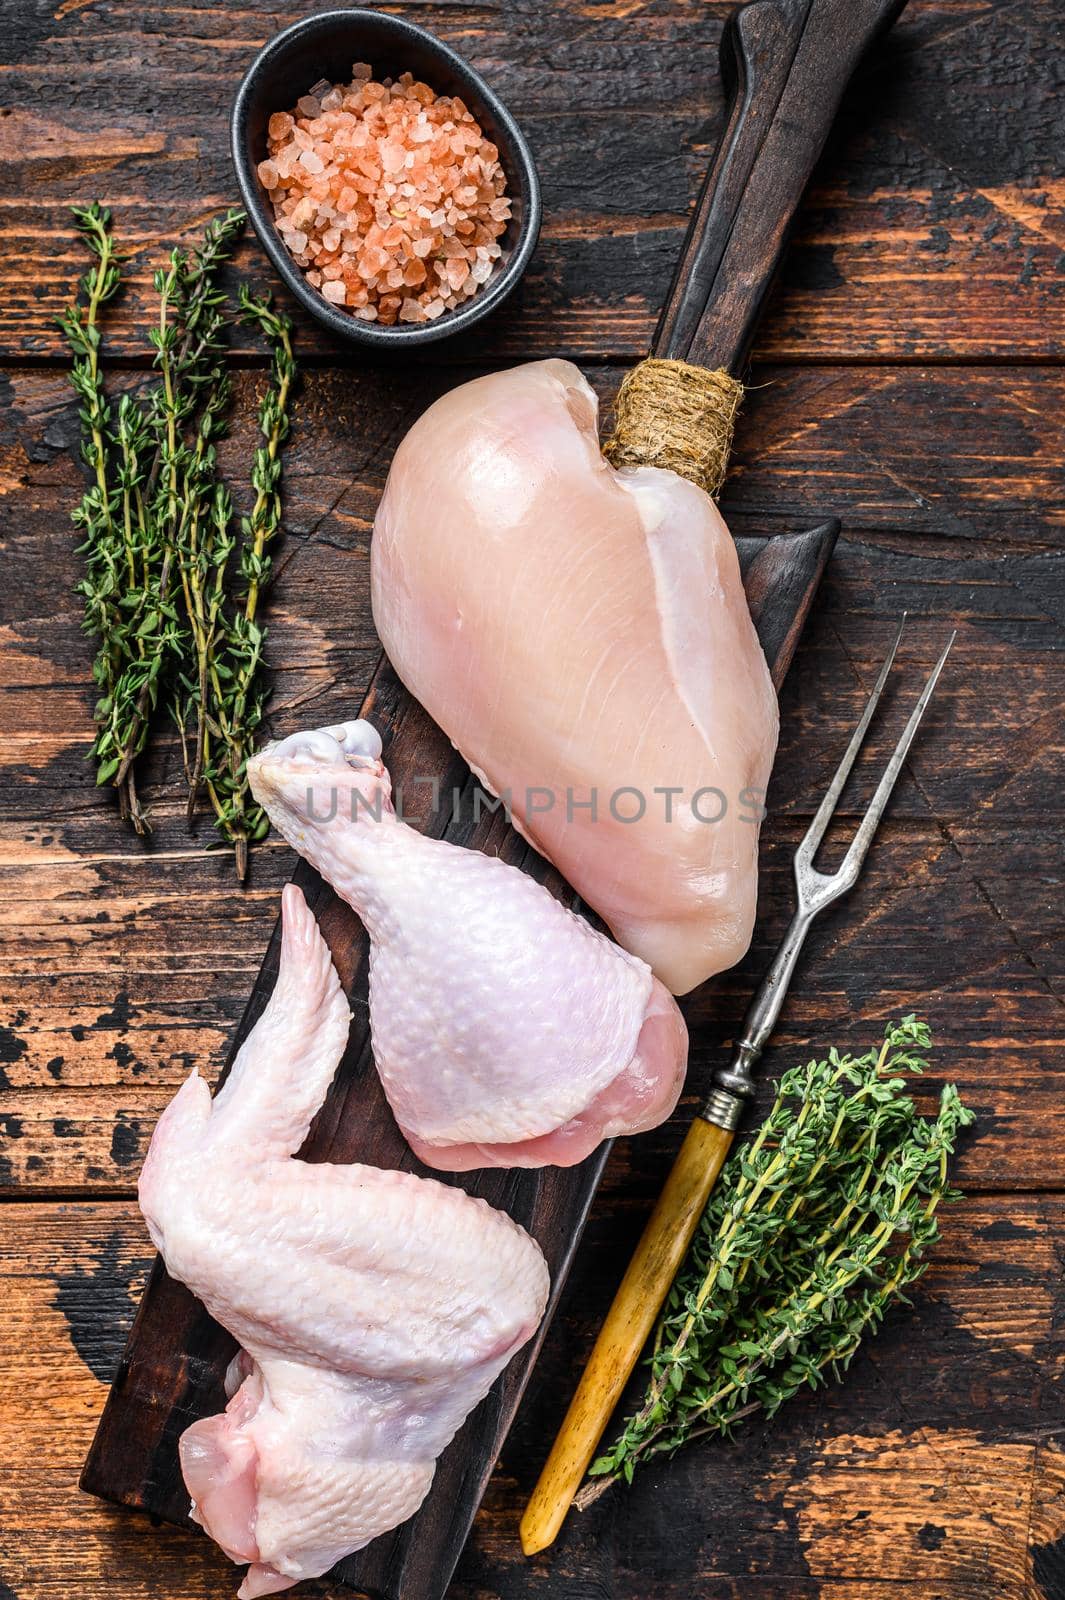 Raw chicken portions for cooking and barbecuing with skinless breasts, drumstick and wings. Dark wooden background. Top view by Composter